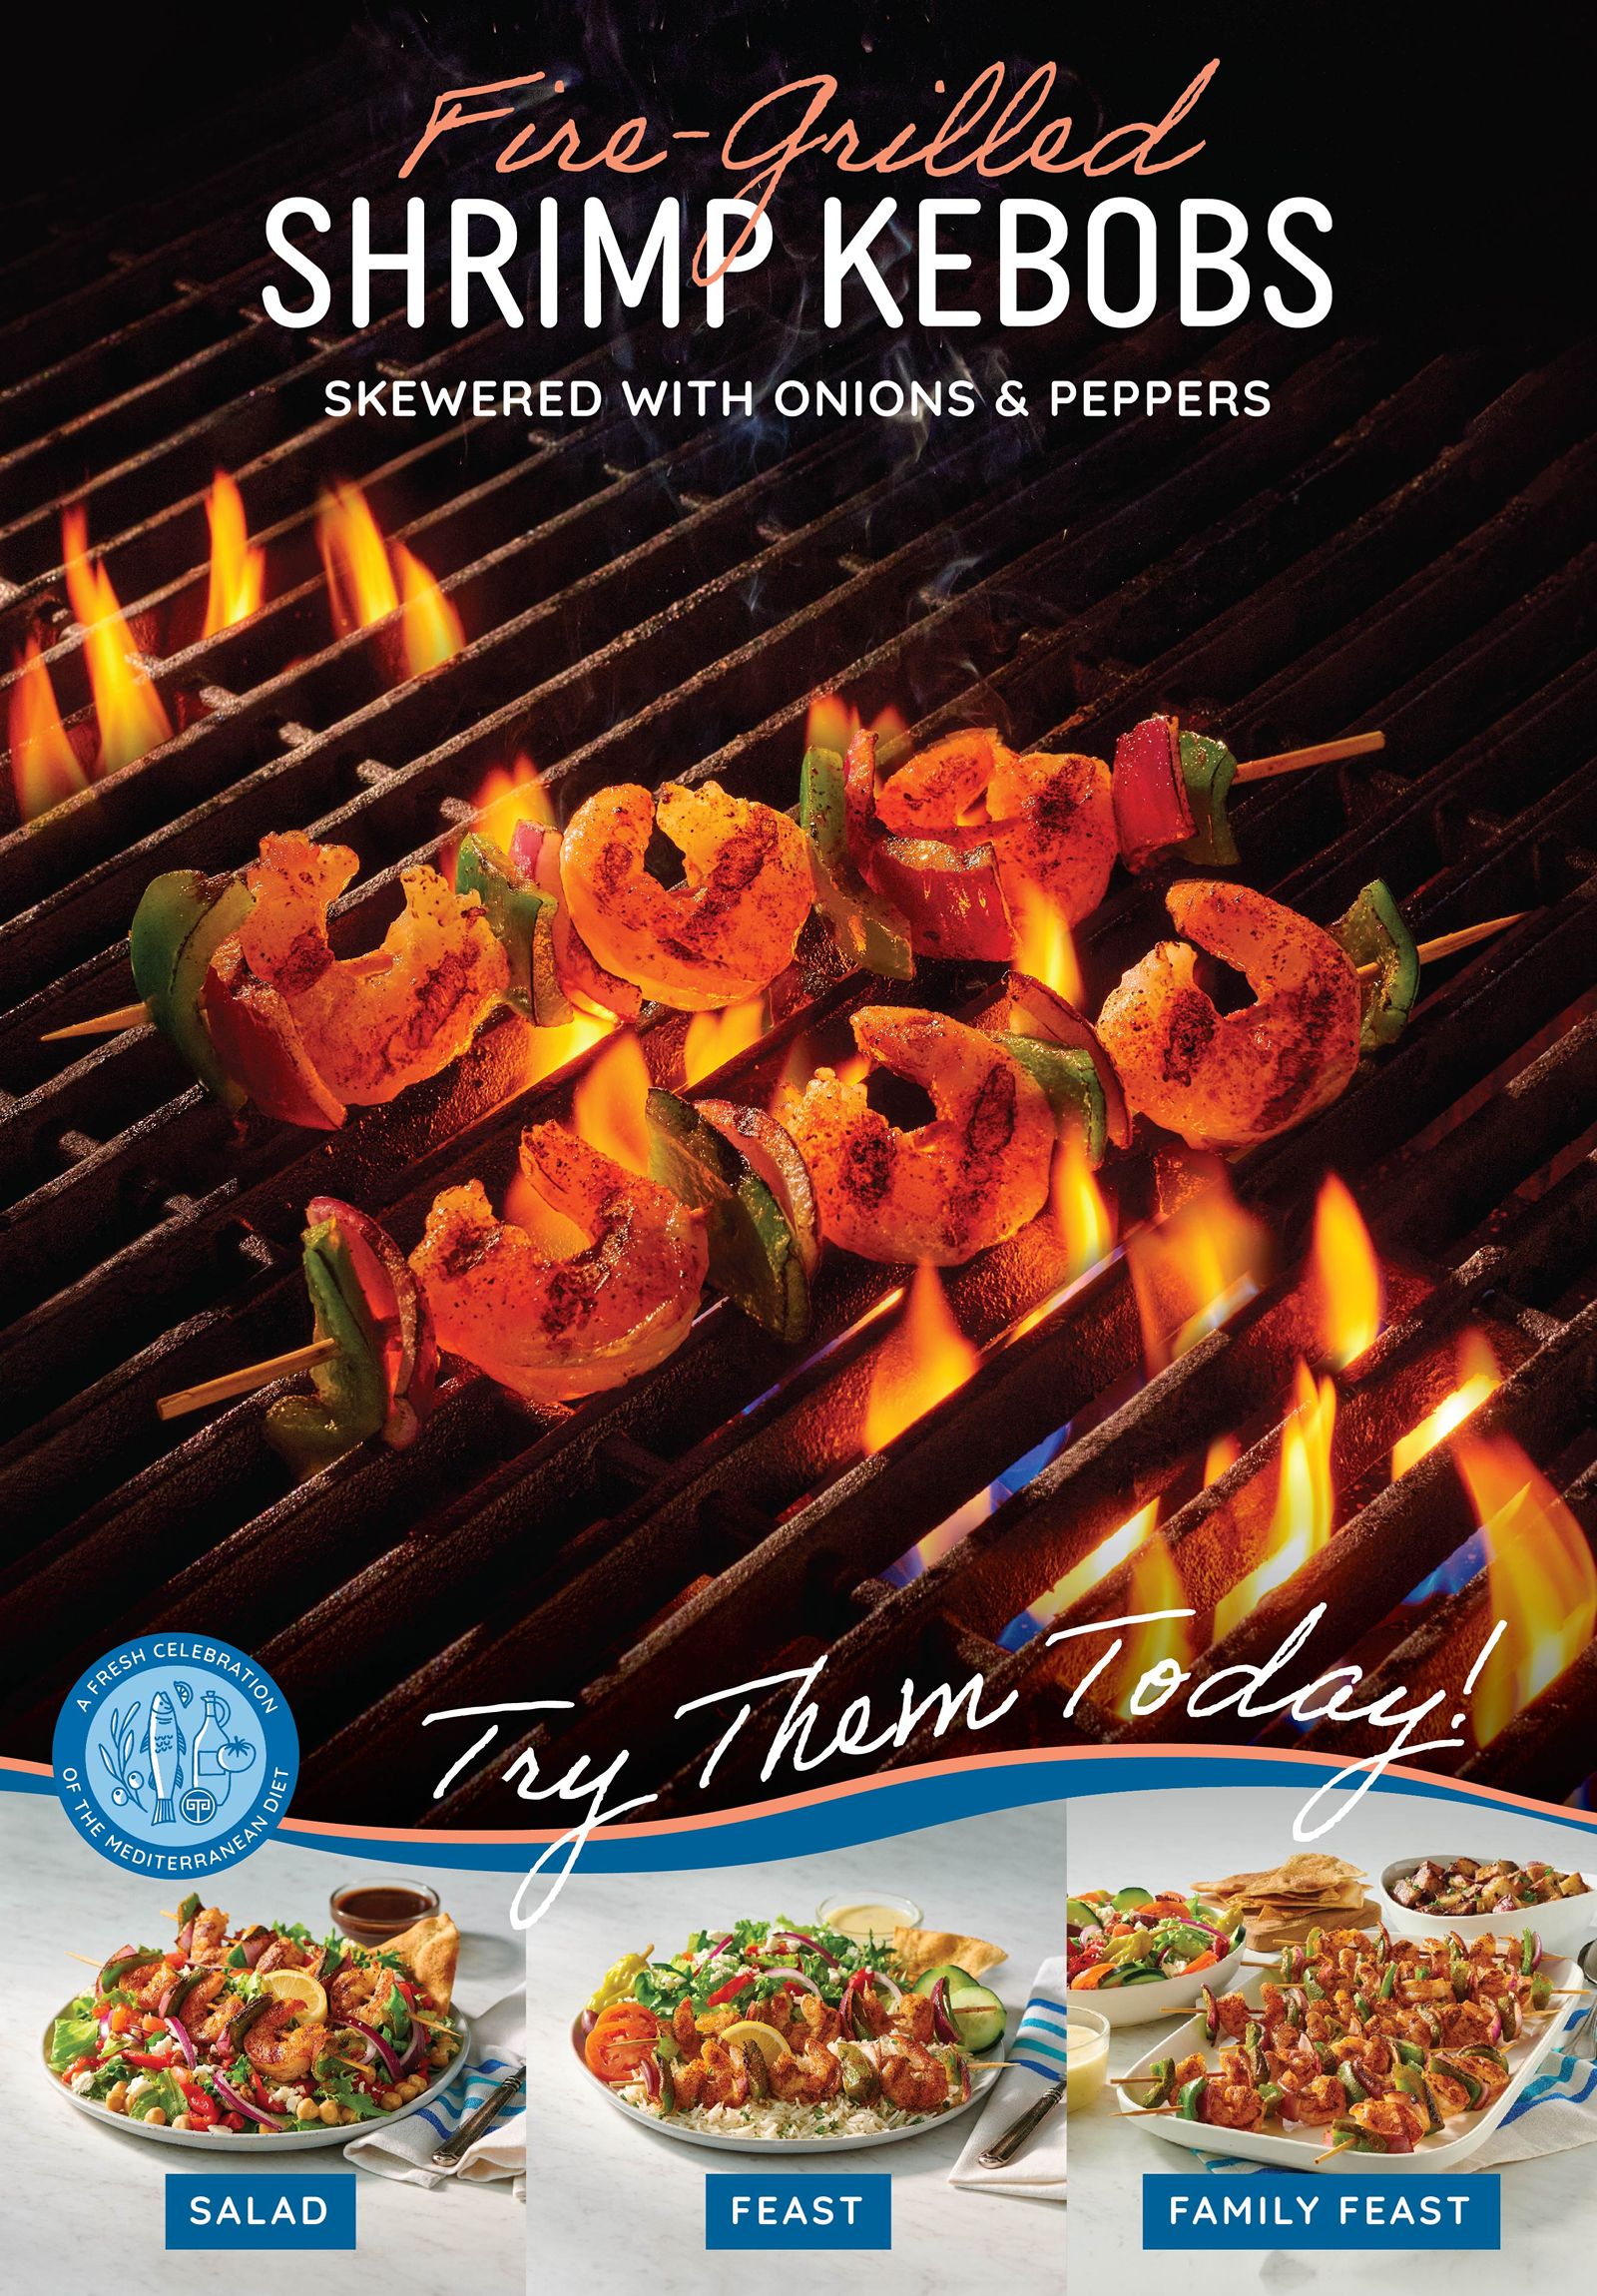 Live the Good Life with Taziki's Fire-Grilled Shrimp Kebobs